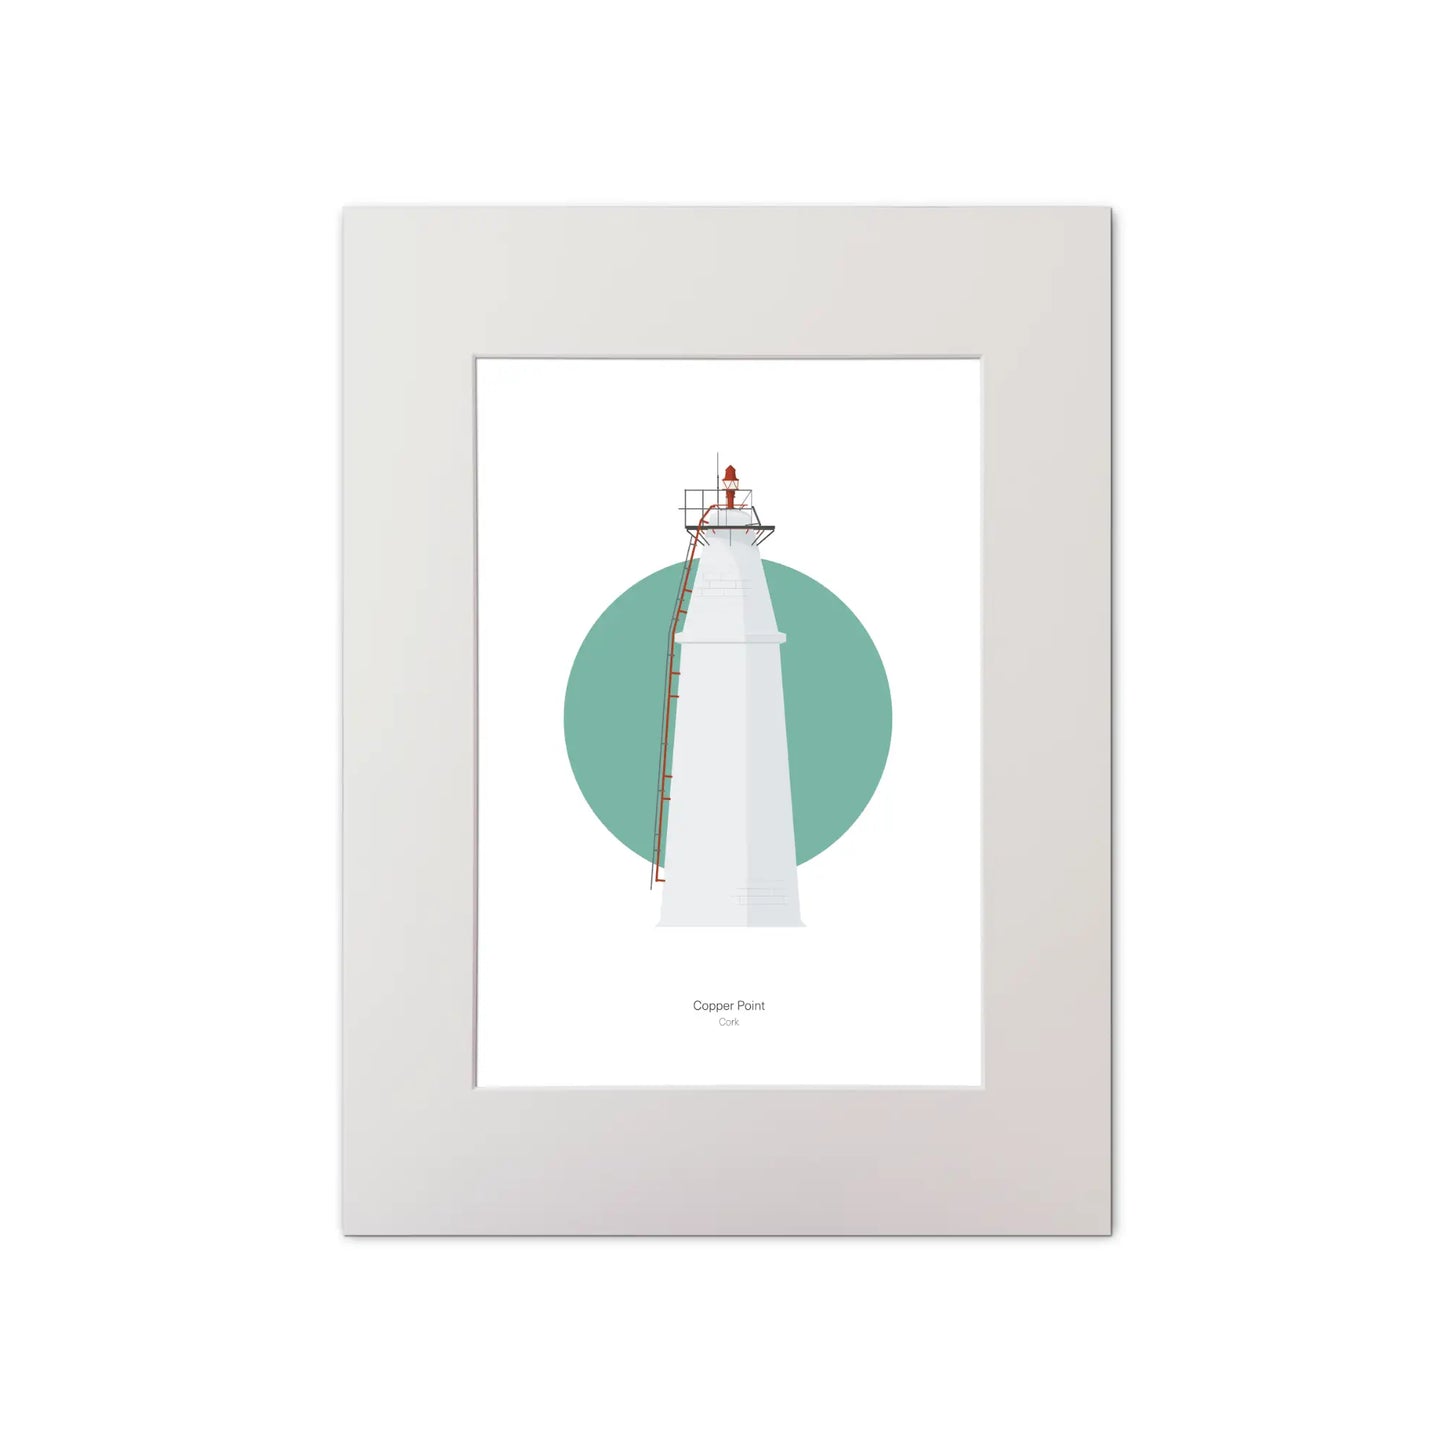 Contemporary graphic illustration of Copper Point lighthouse on a white background inside light blue square, mounted and measuring 30x40cm.